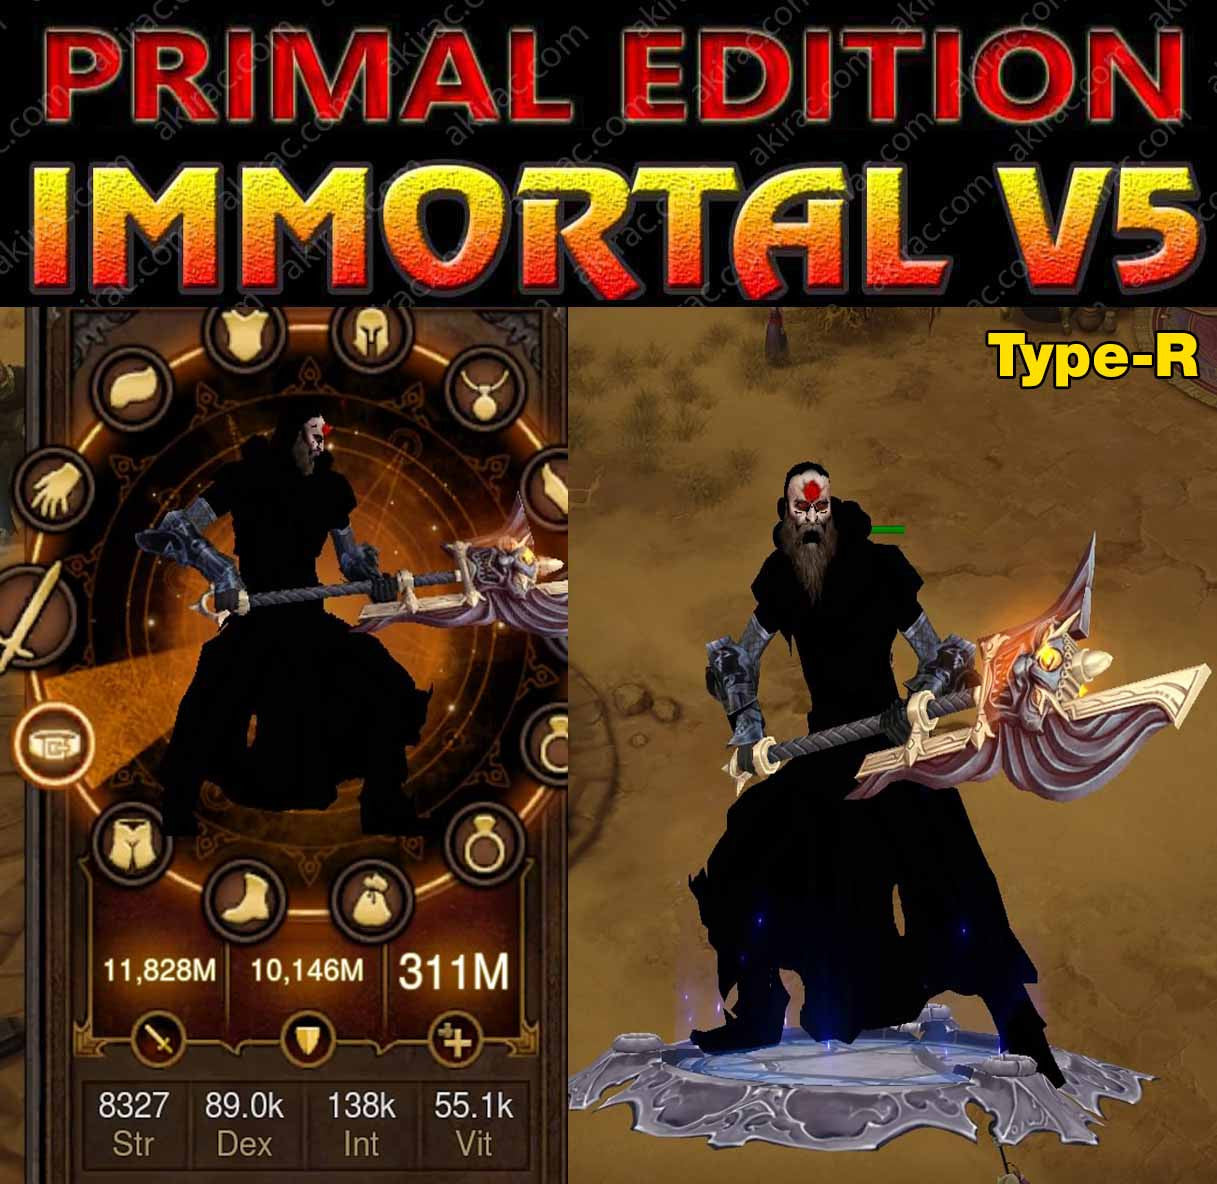 [Primal Ancient] Diablo 3 Immortal v5 Type-R FASTEST TStorms Monk v2 Killing Diablo 3 Mods ROS Seasonal and Non Seasonal Save Mod - Modded Items and Gear - Hacks - Cheats - Trainers for Playstation 4 - Playstation 5 - Nintendo Switch - Xbox One